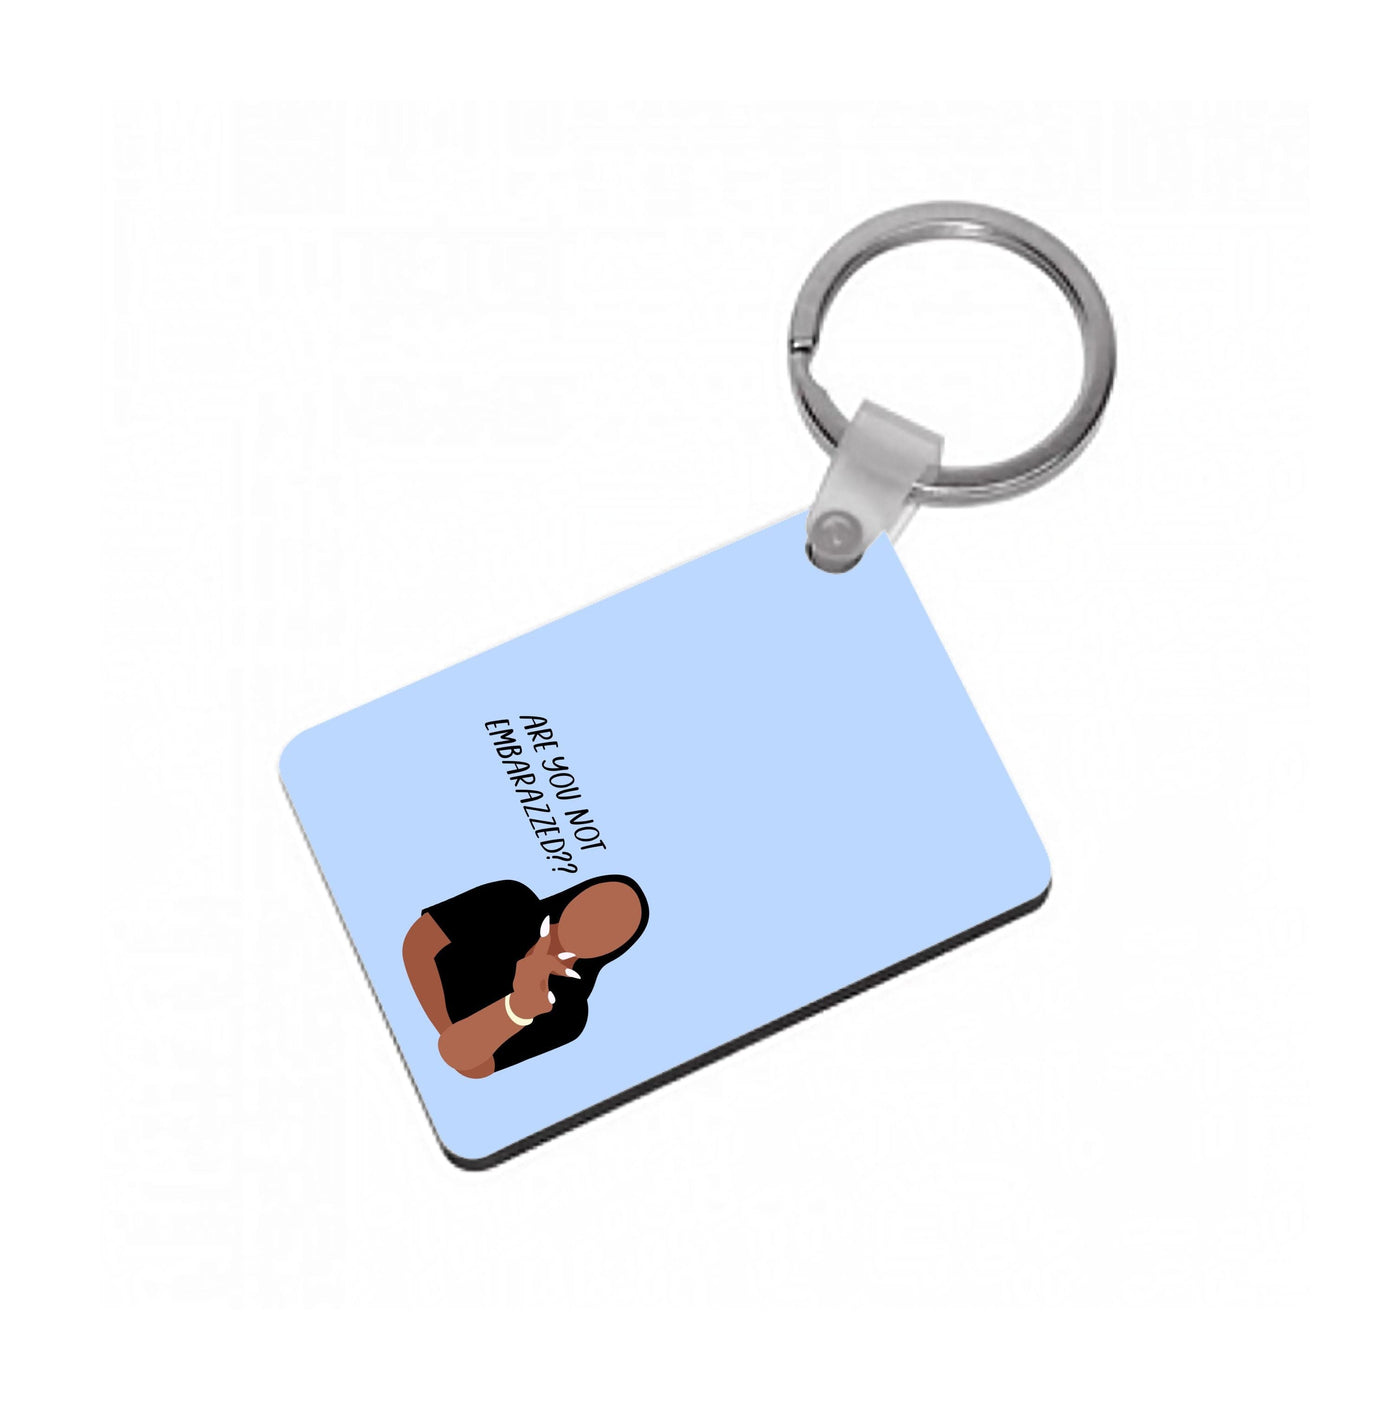 Are You Not Embarazzed? - British Pop Culture Keyring